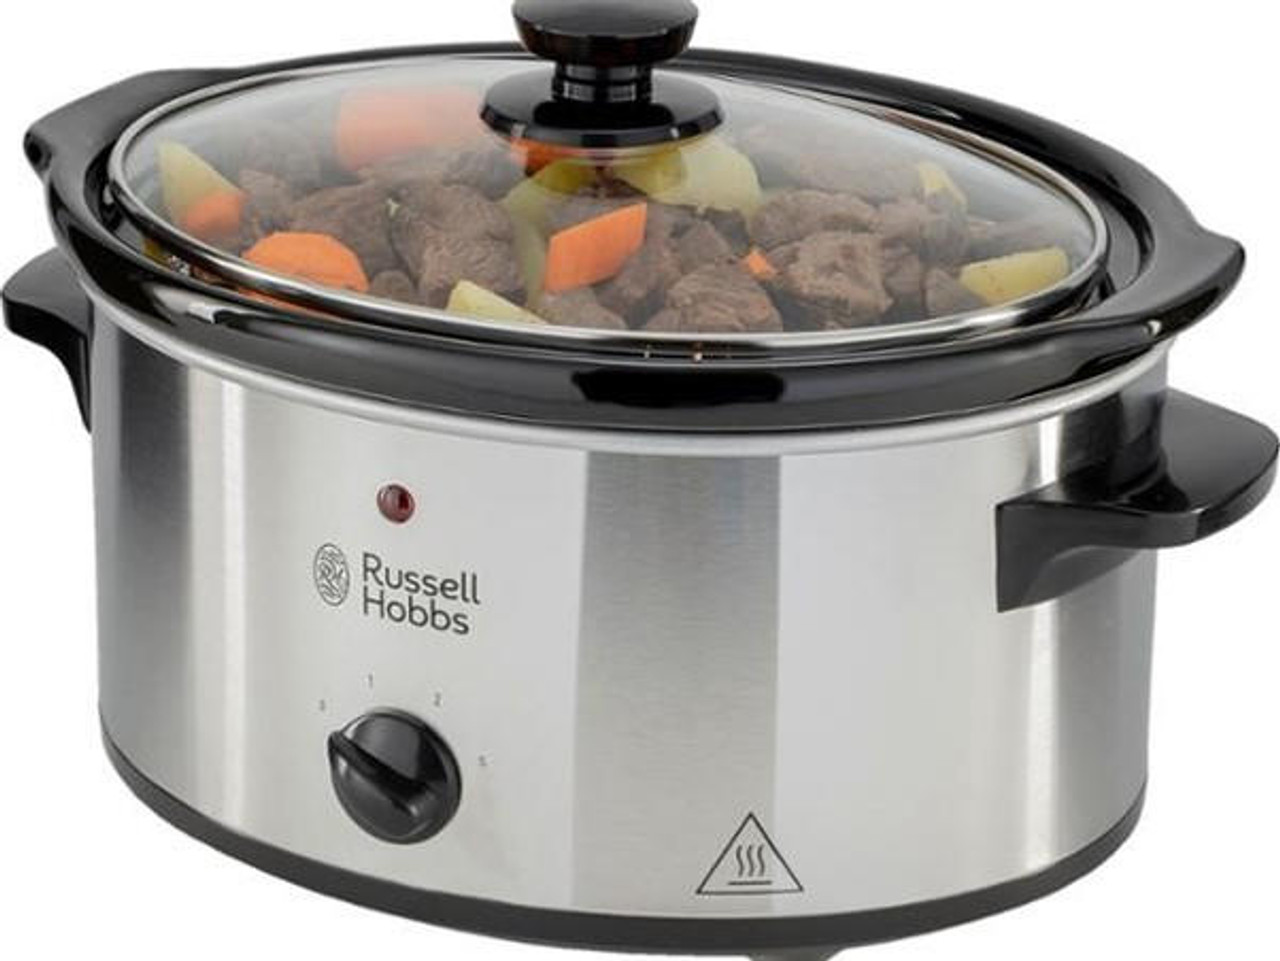 https://tommiekelly.ie/wp-content/uploads/2023/01/russell-hobbs-3.5l-stainless-steel-slow-cooker-or-23200__41197.jpg